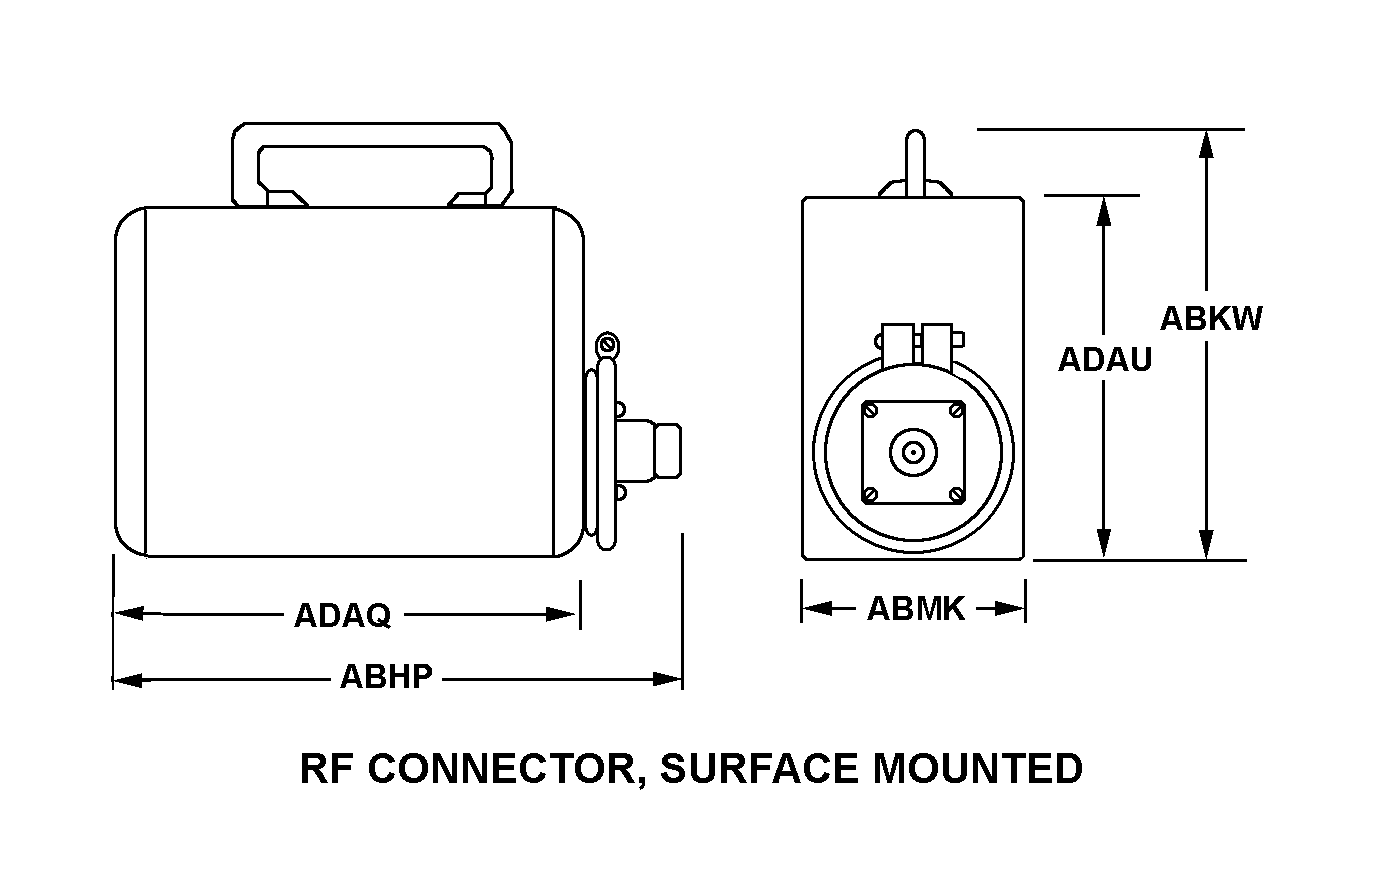 RF CONNECTOR, SURFACE MOUNTED style nsn 5985-01-155-1361